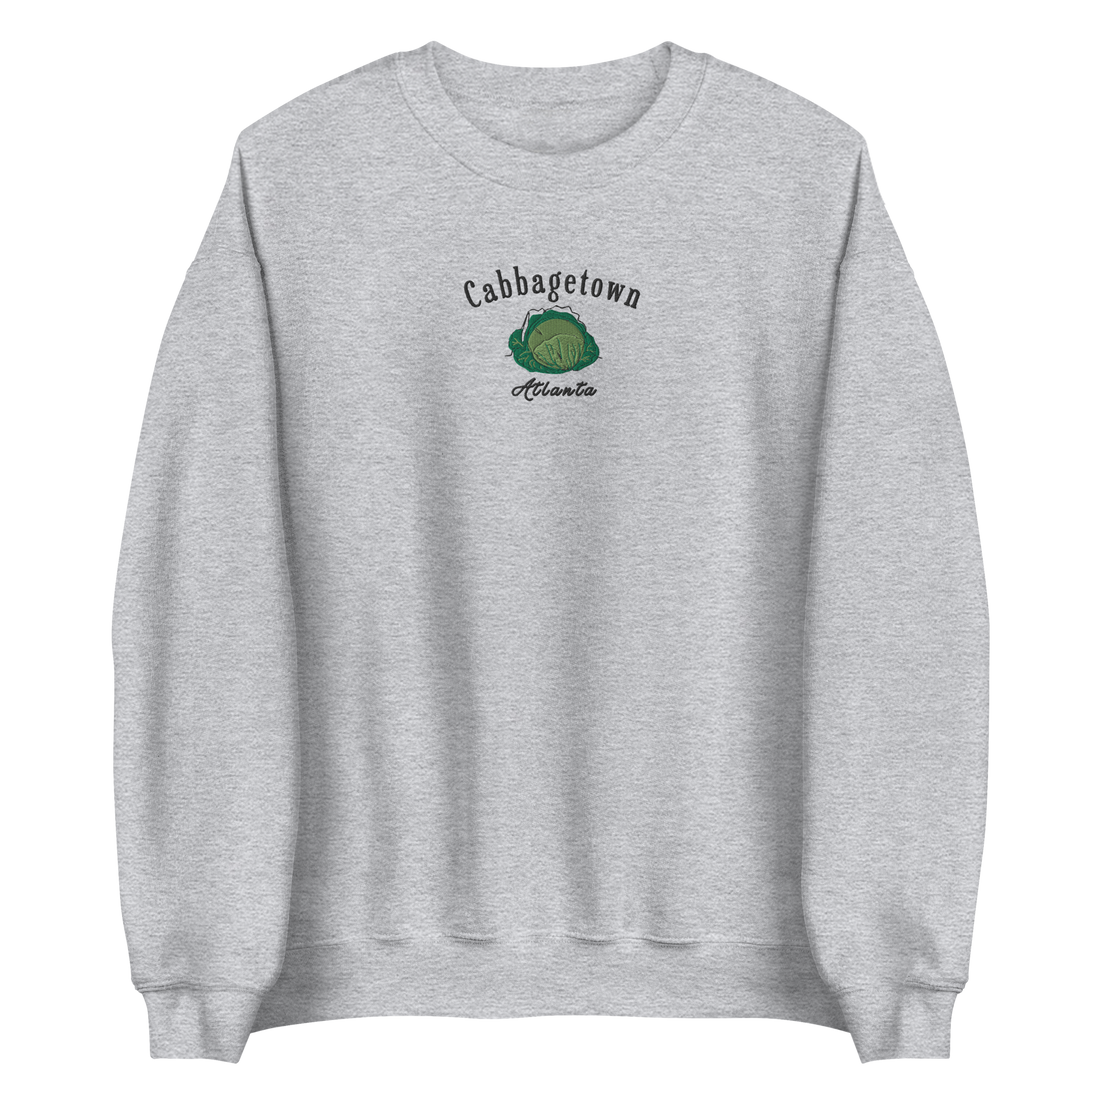 The &quot;Cabbagetown Classic Sweater&quot; - a vintage-inspired, embroidered piece celebrating the historic charm of Atlanta&